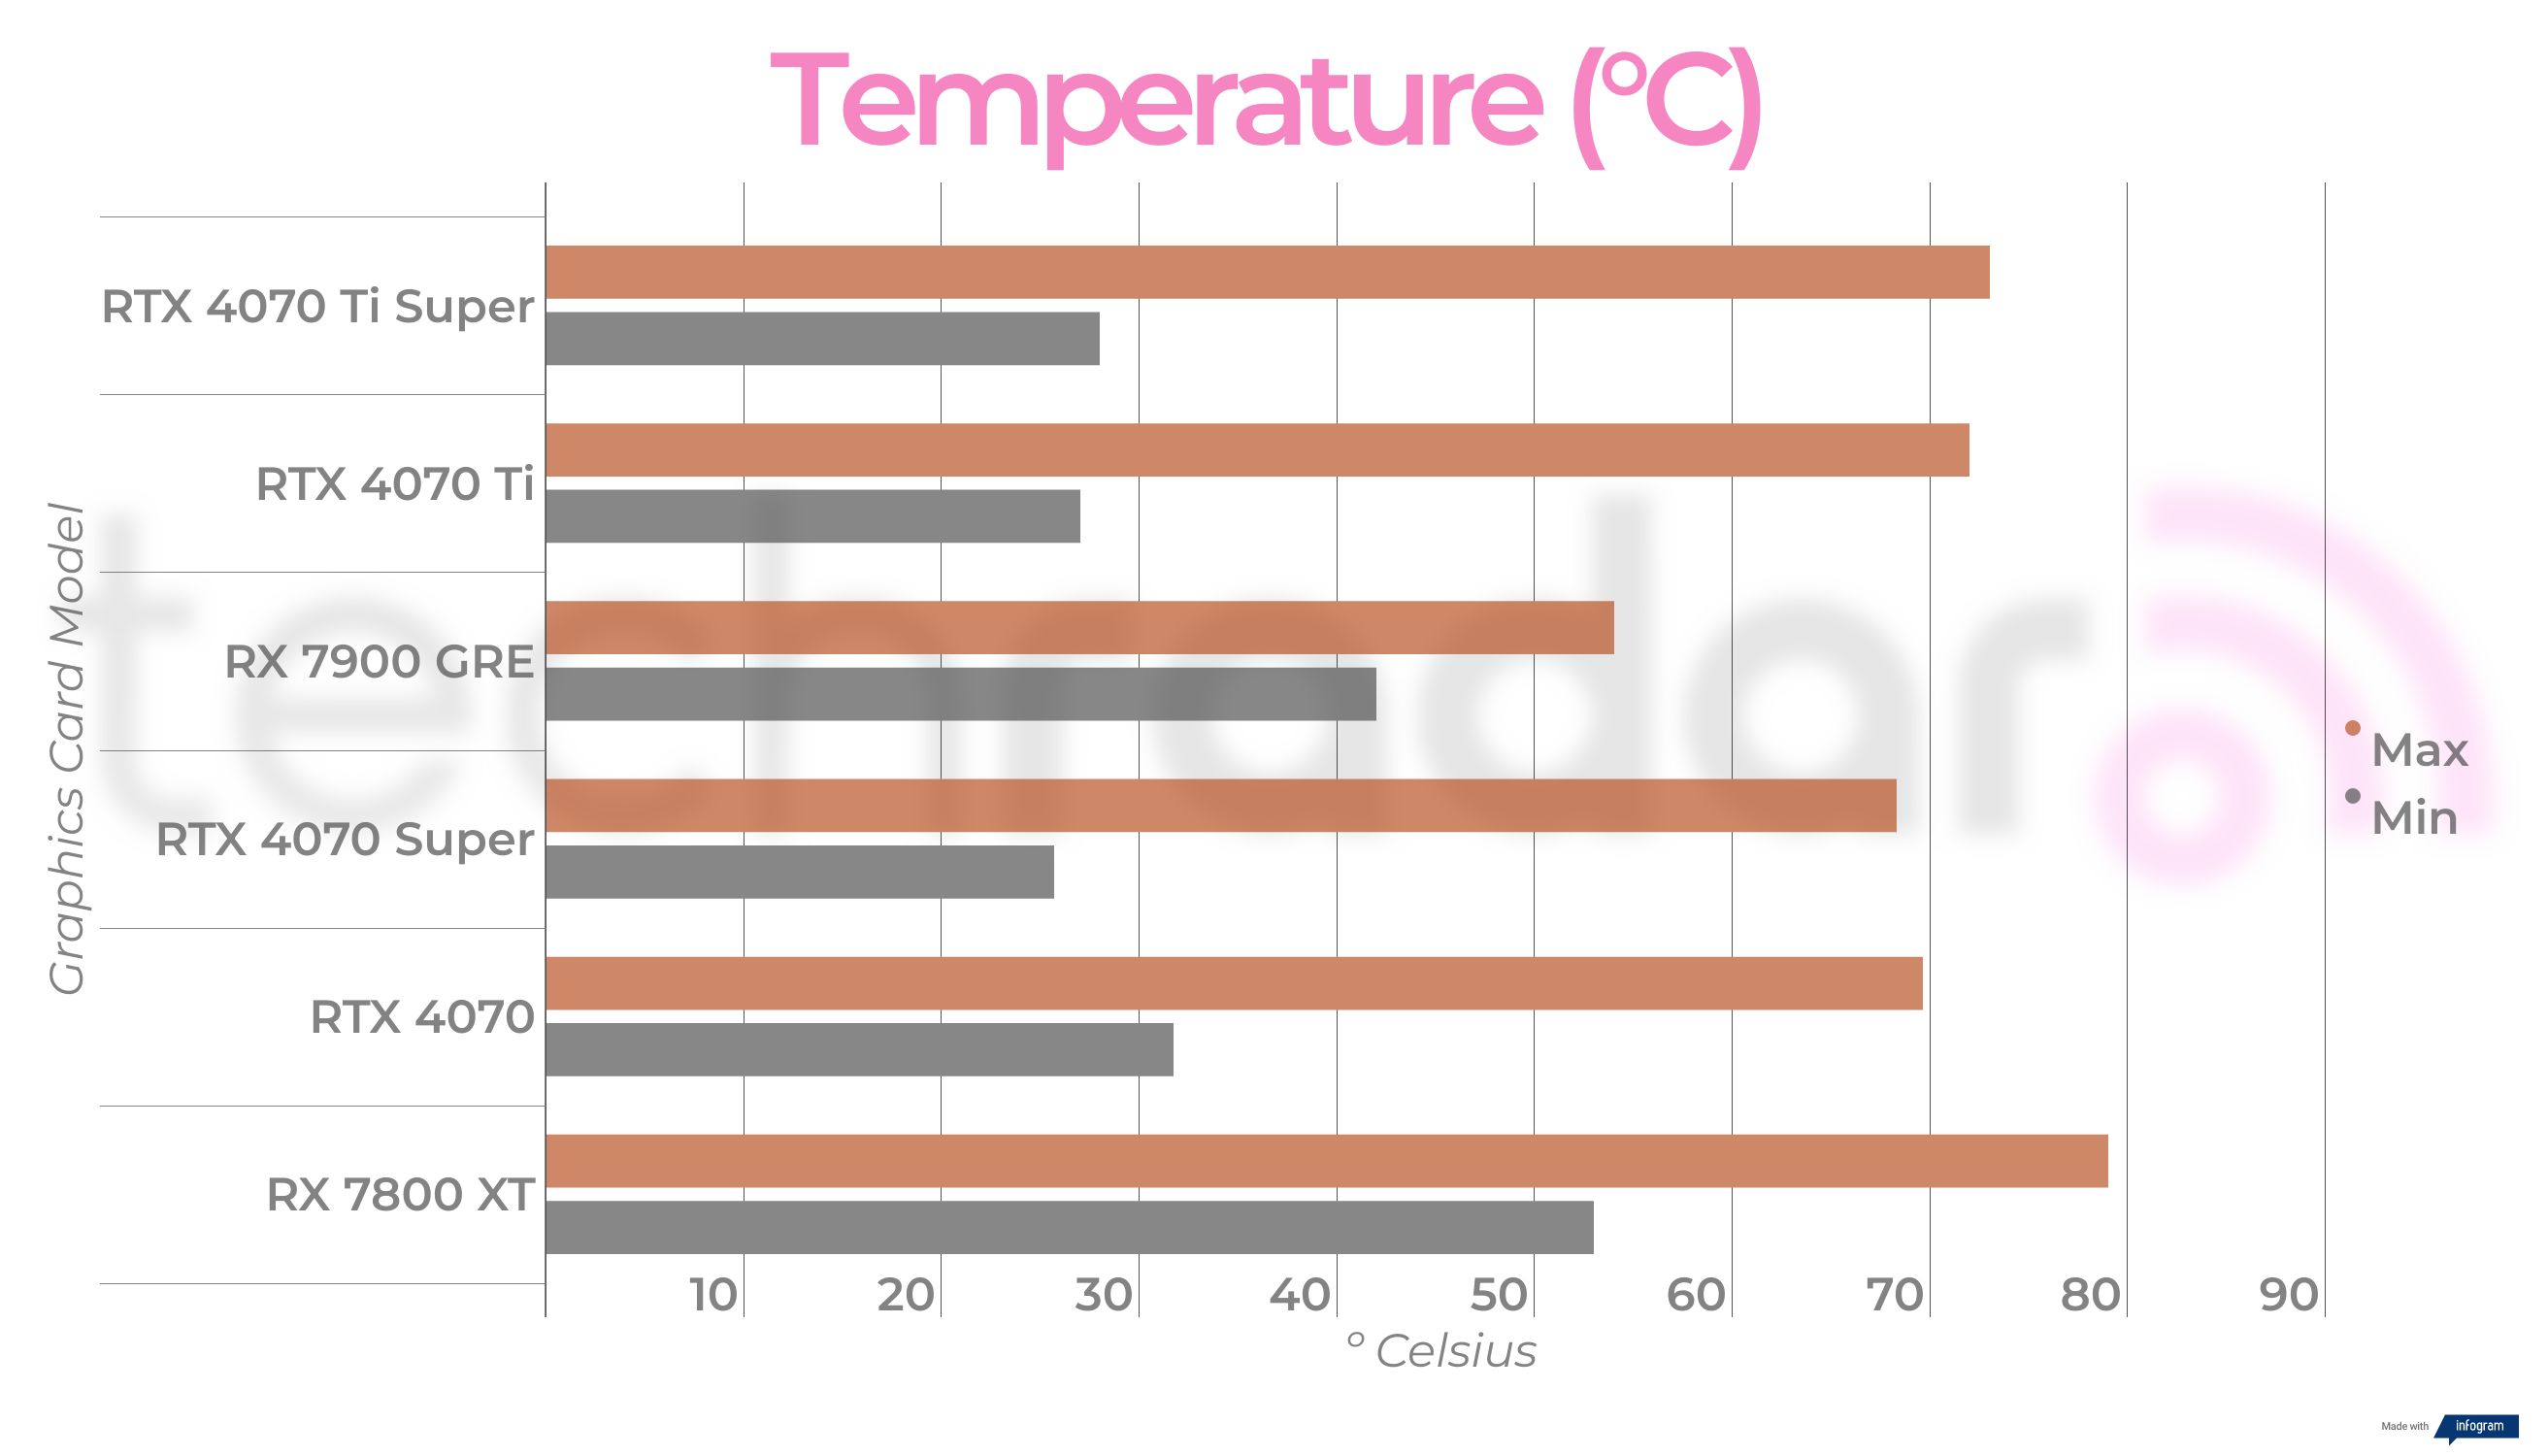 Power and Temperature benchmarks for the RX 7900 GRE